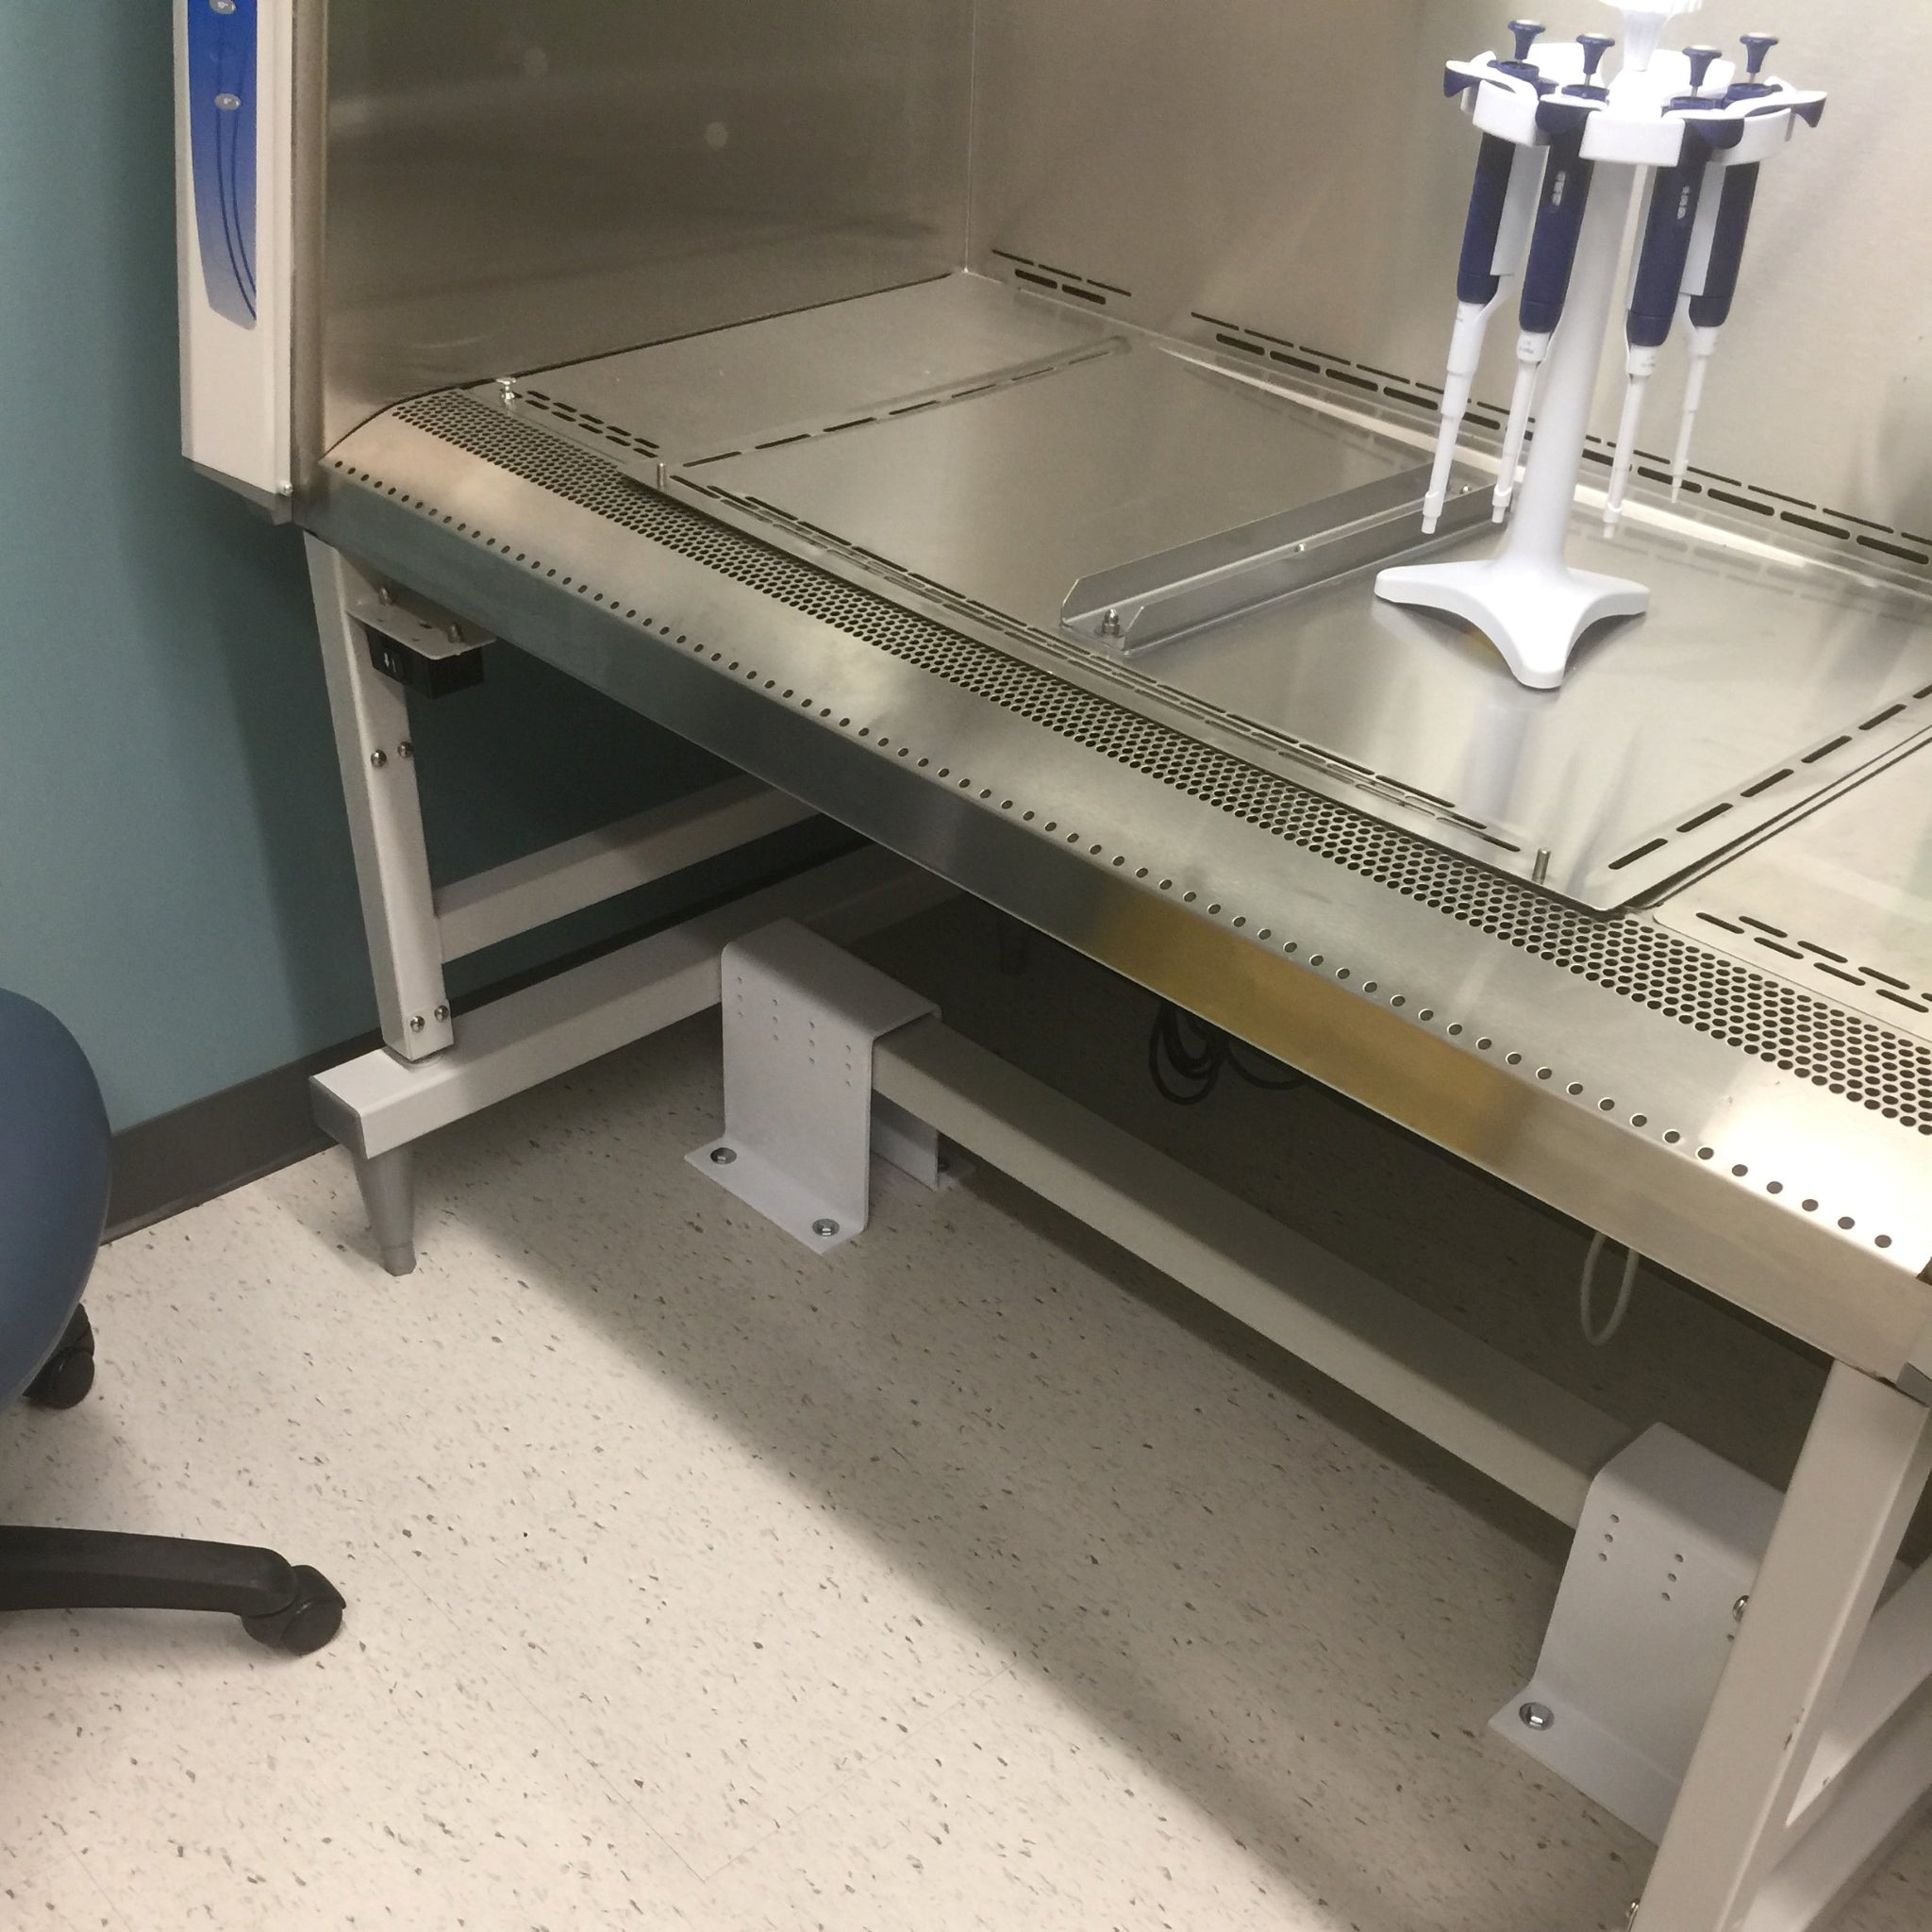 Biosafety Cabinet Fastening System (Articulating Unit) (Floor Anchorage - Max 800 Lbs.)